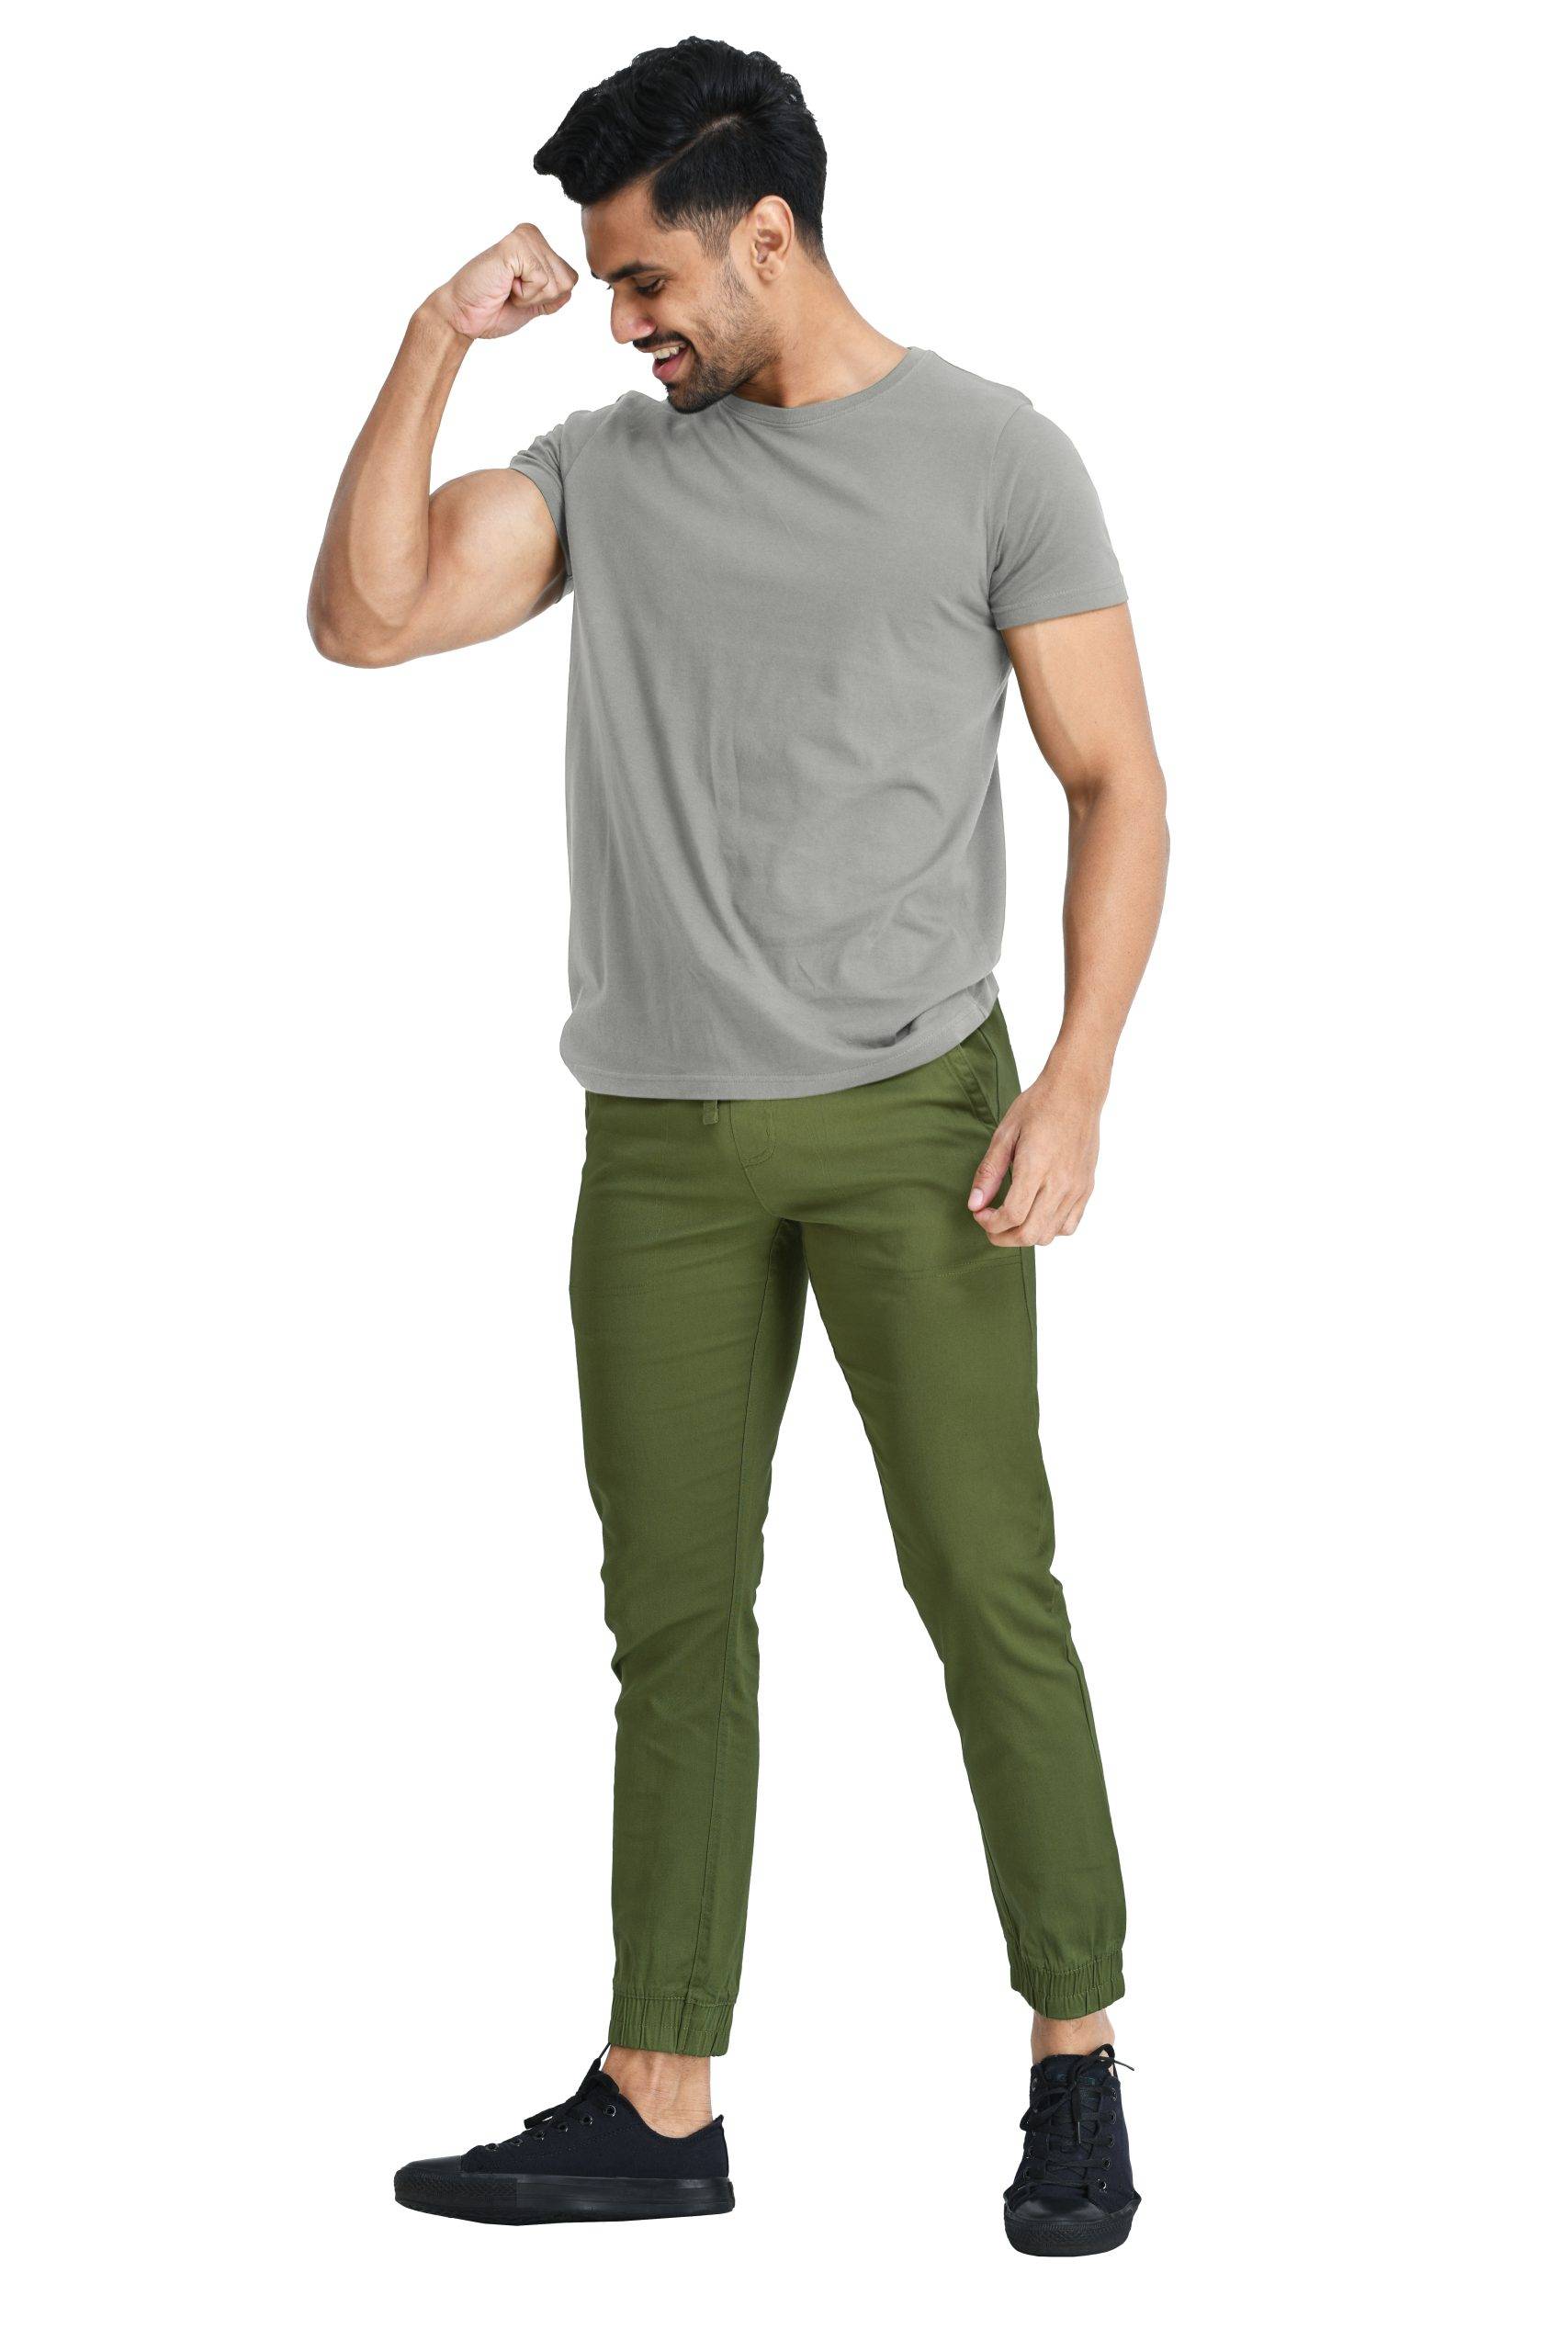 Buy Olive Green Men Striped Sweatpants Online in India at Beyoung